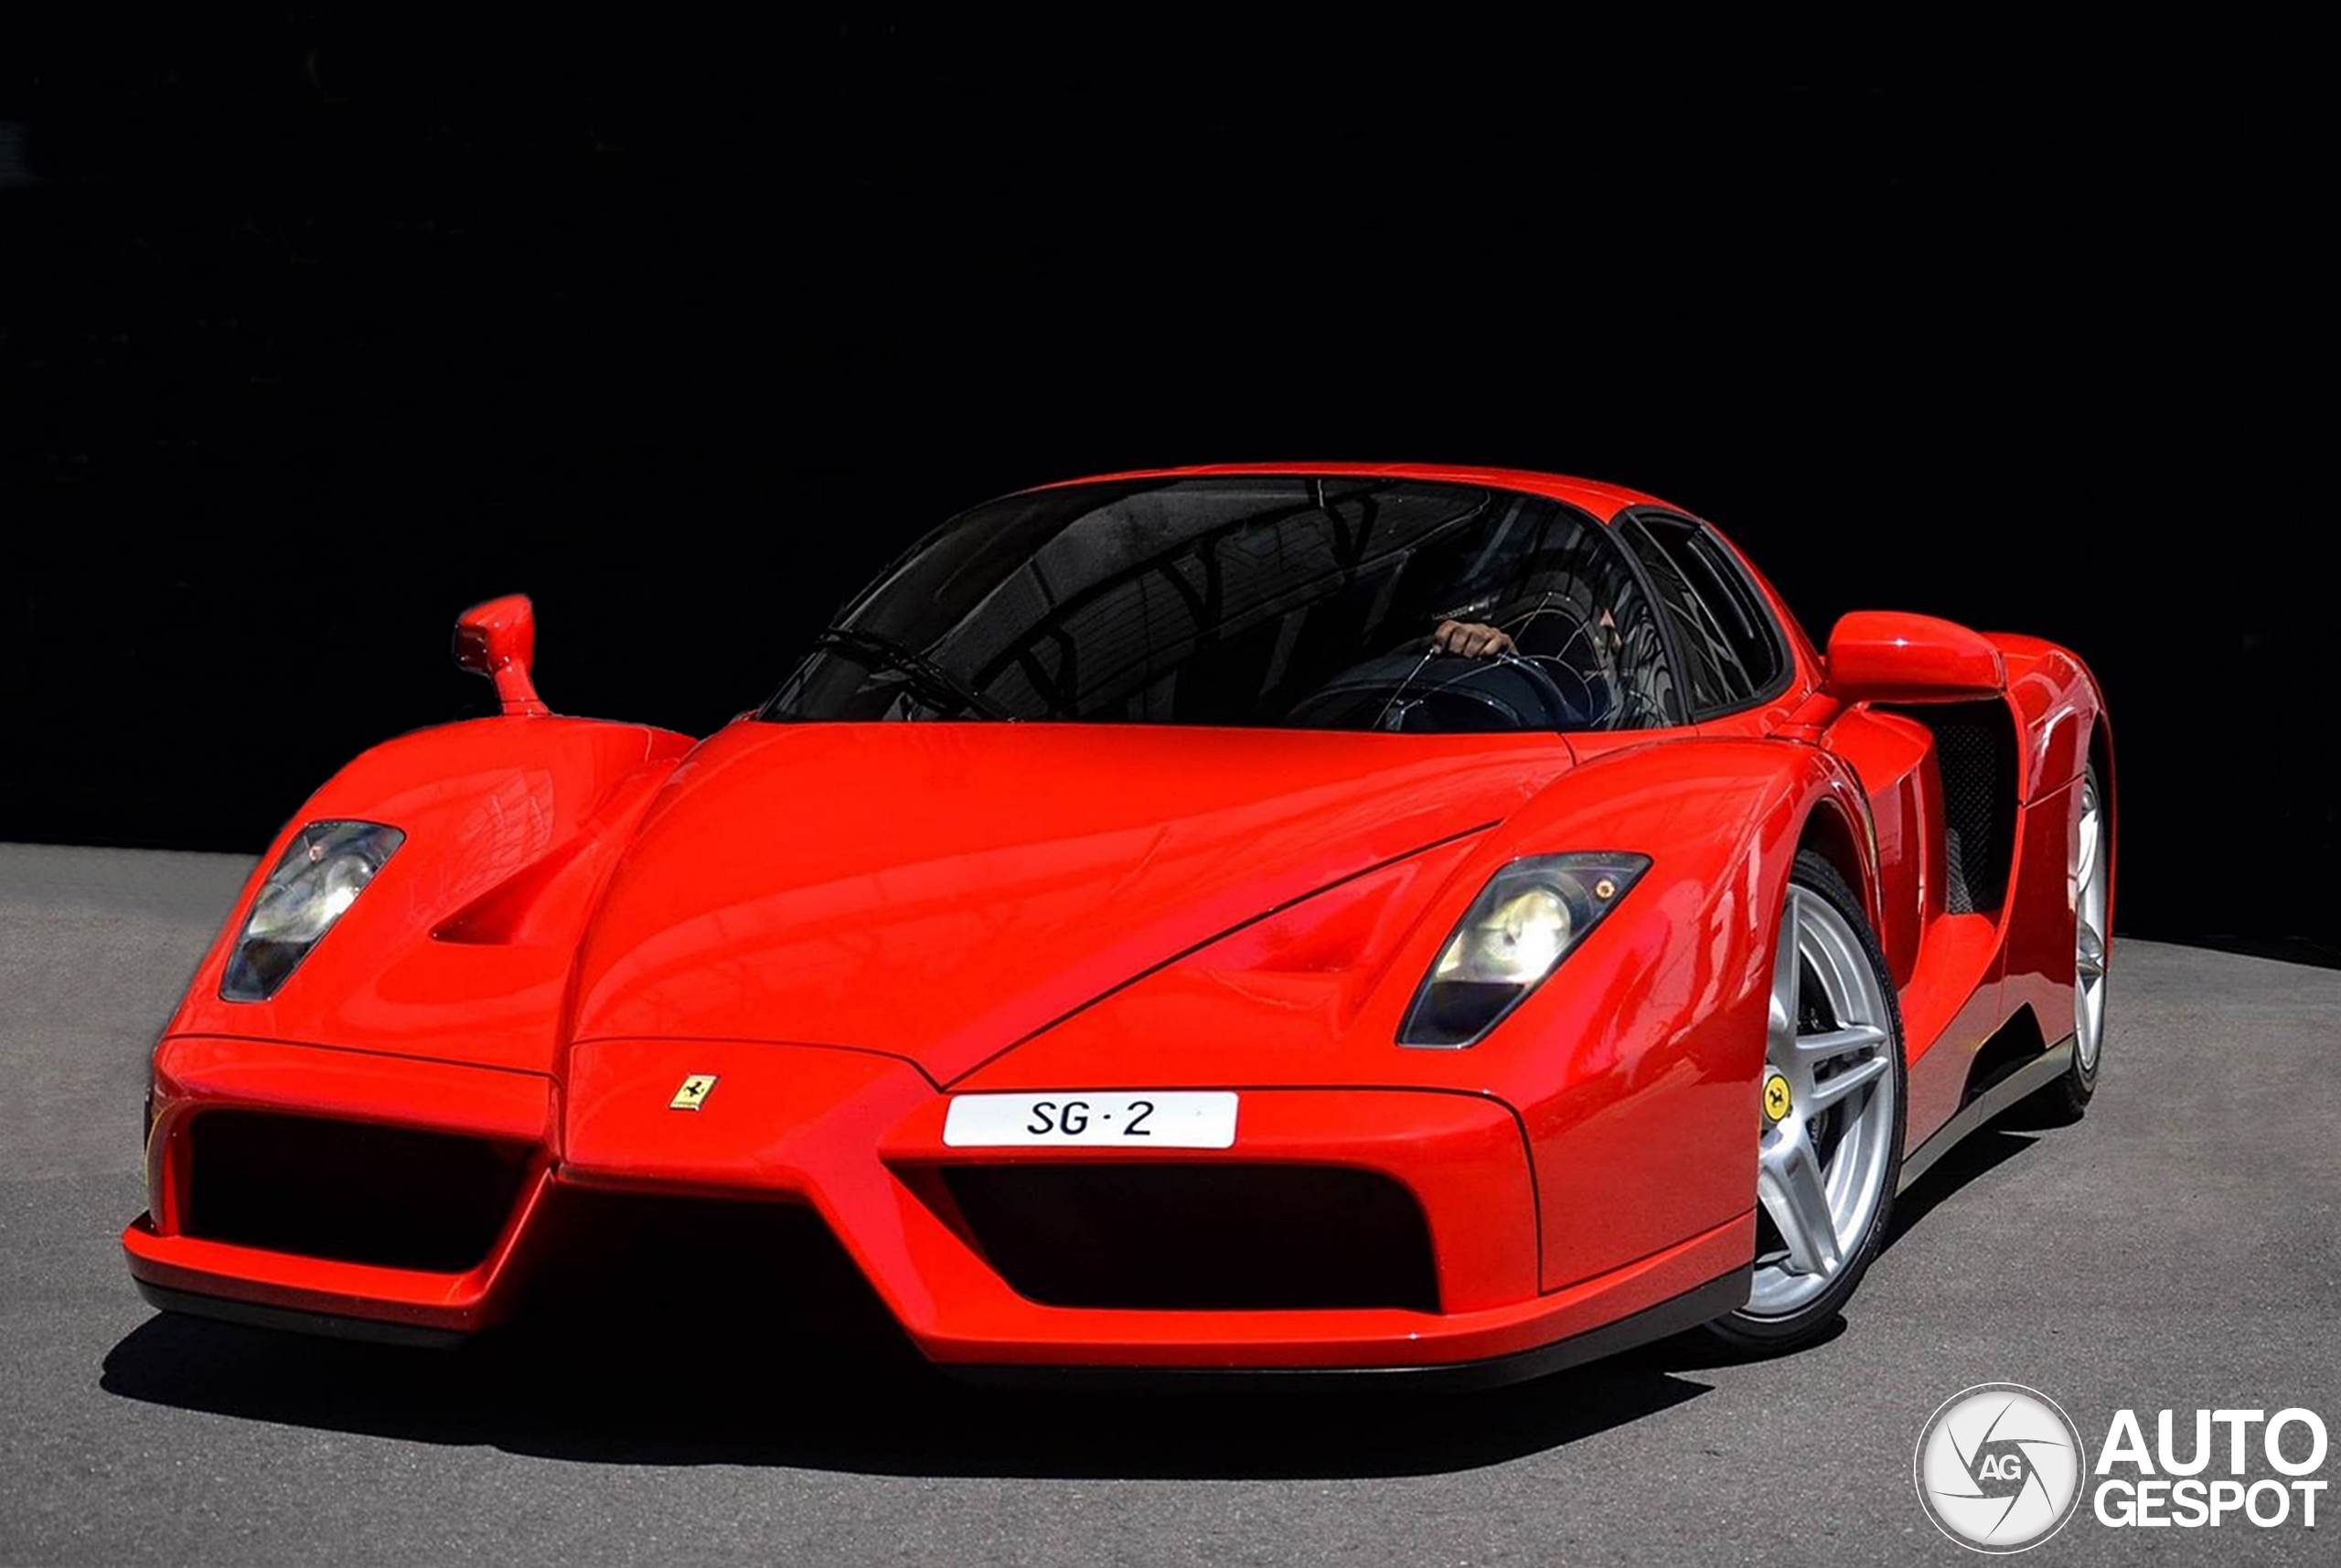 Who is more special, the license plate or the Enzo?